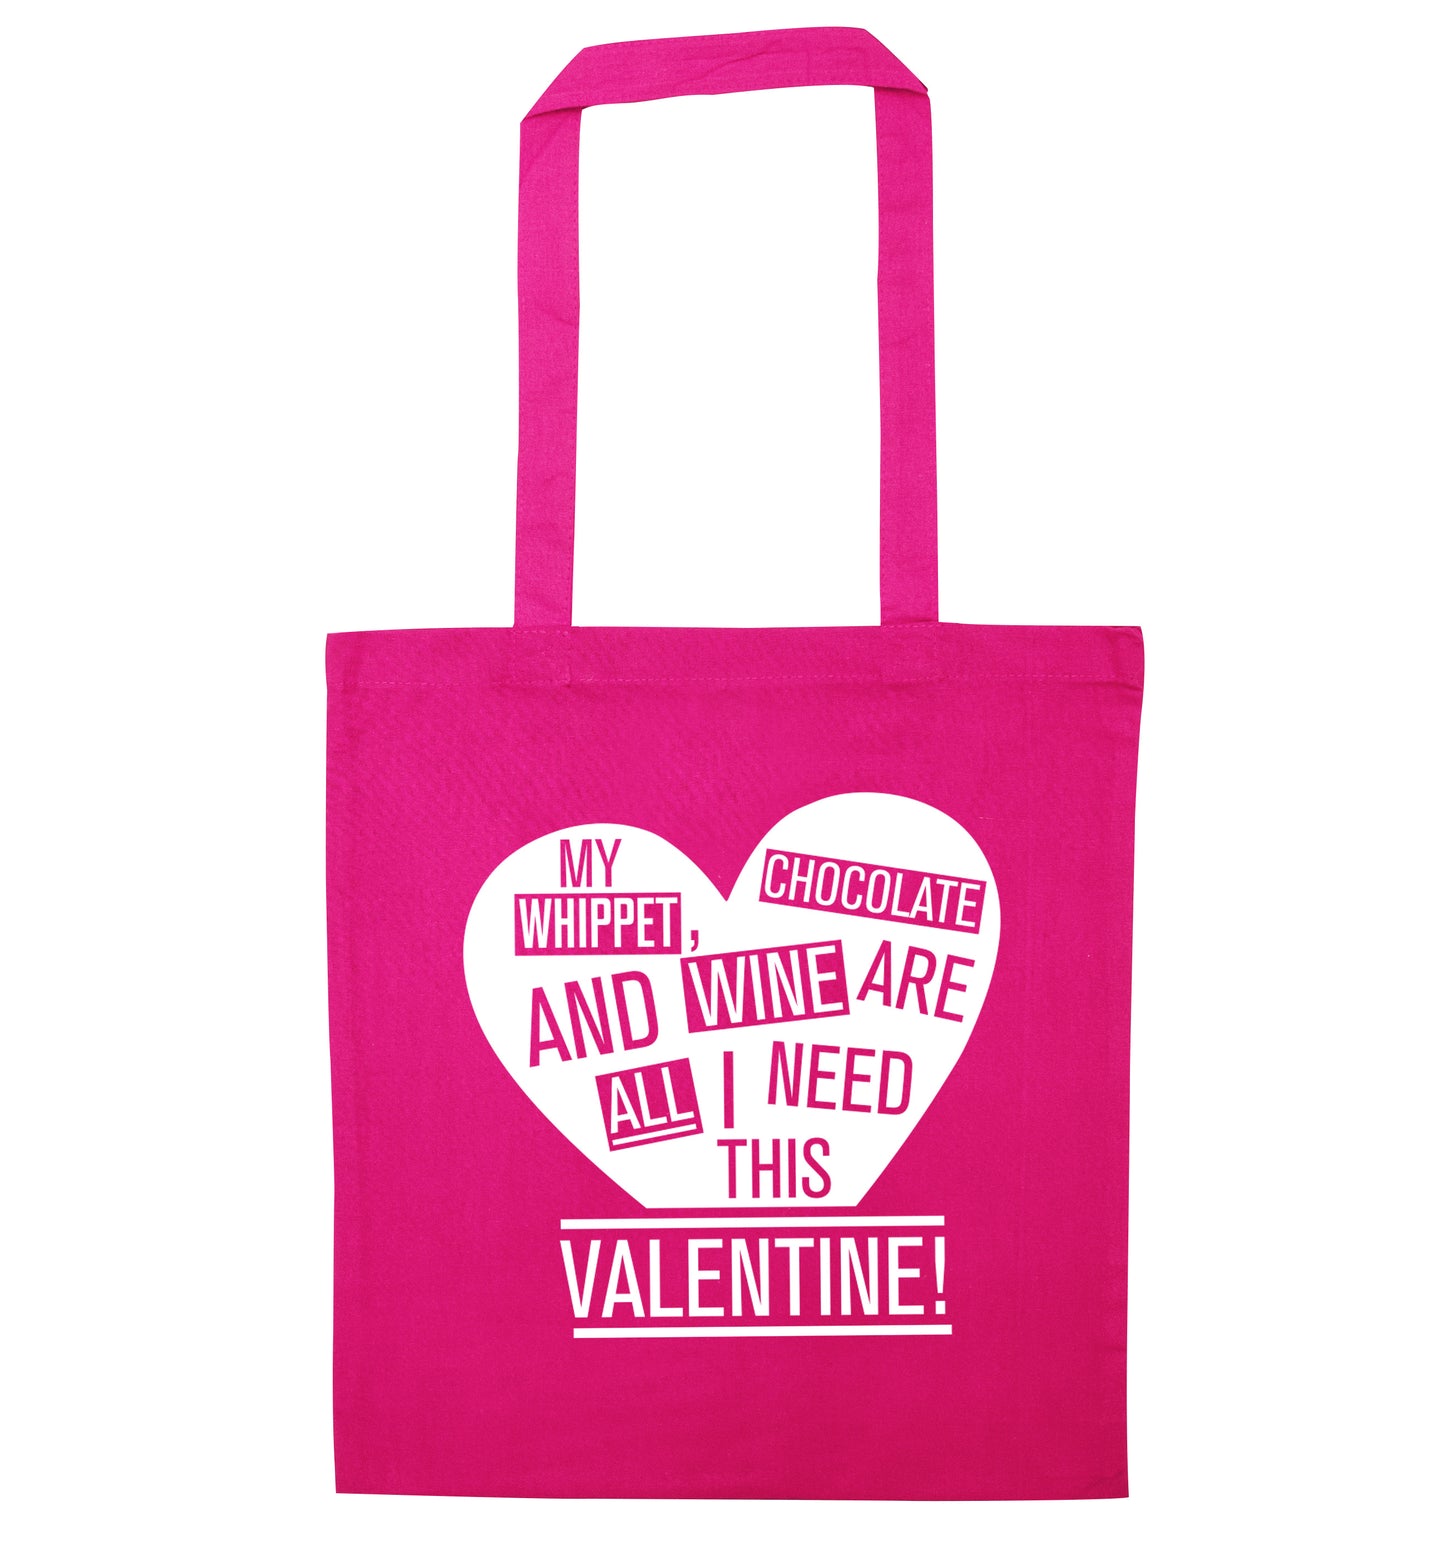 My whippet, chocolate and wine are all I need this valentine! pink tote bag